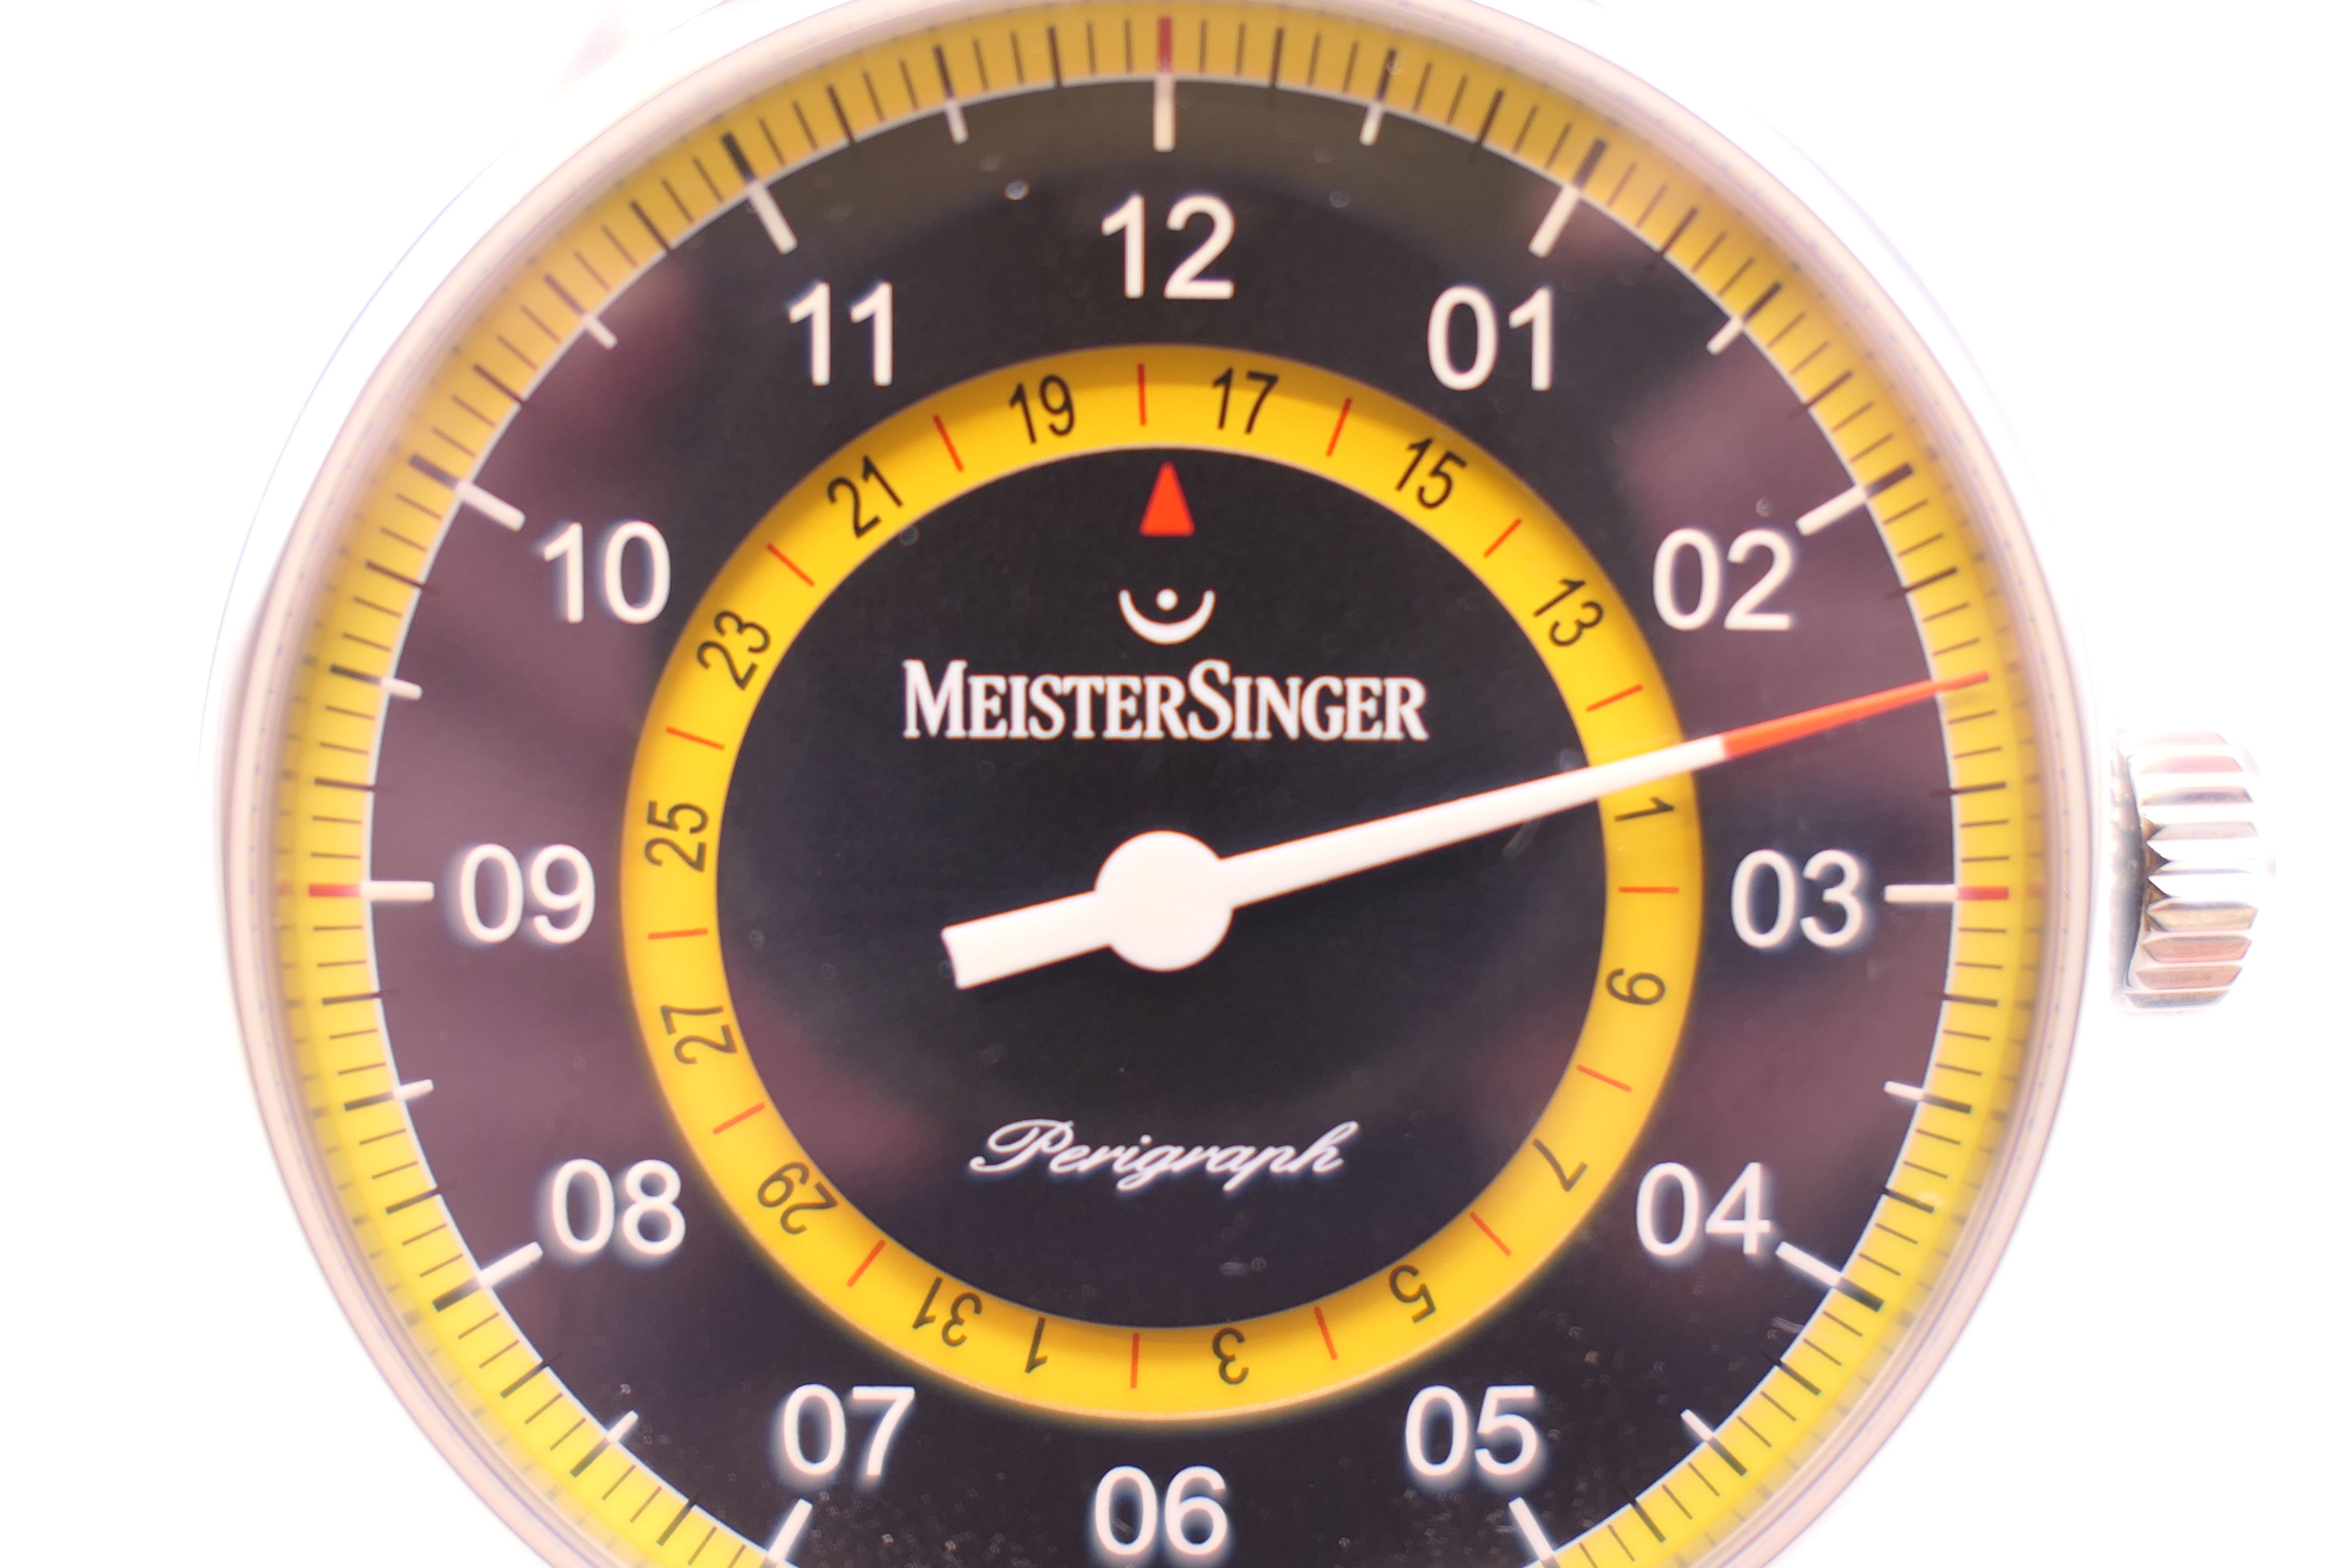 A boxed limited edition Meistersinger Perigraph gentleman's wristwatch. 4.5 cm wide. - Image 3 of 20